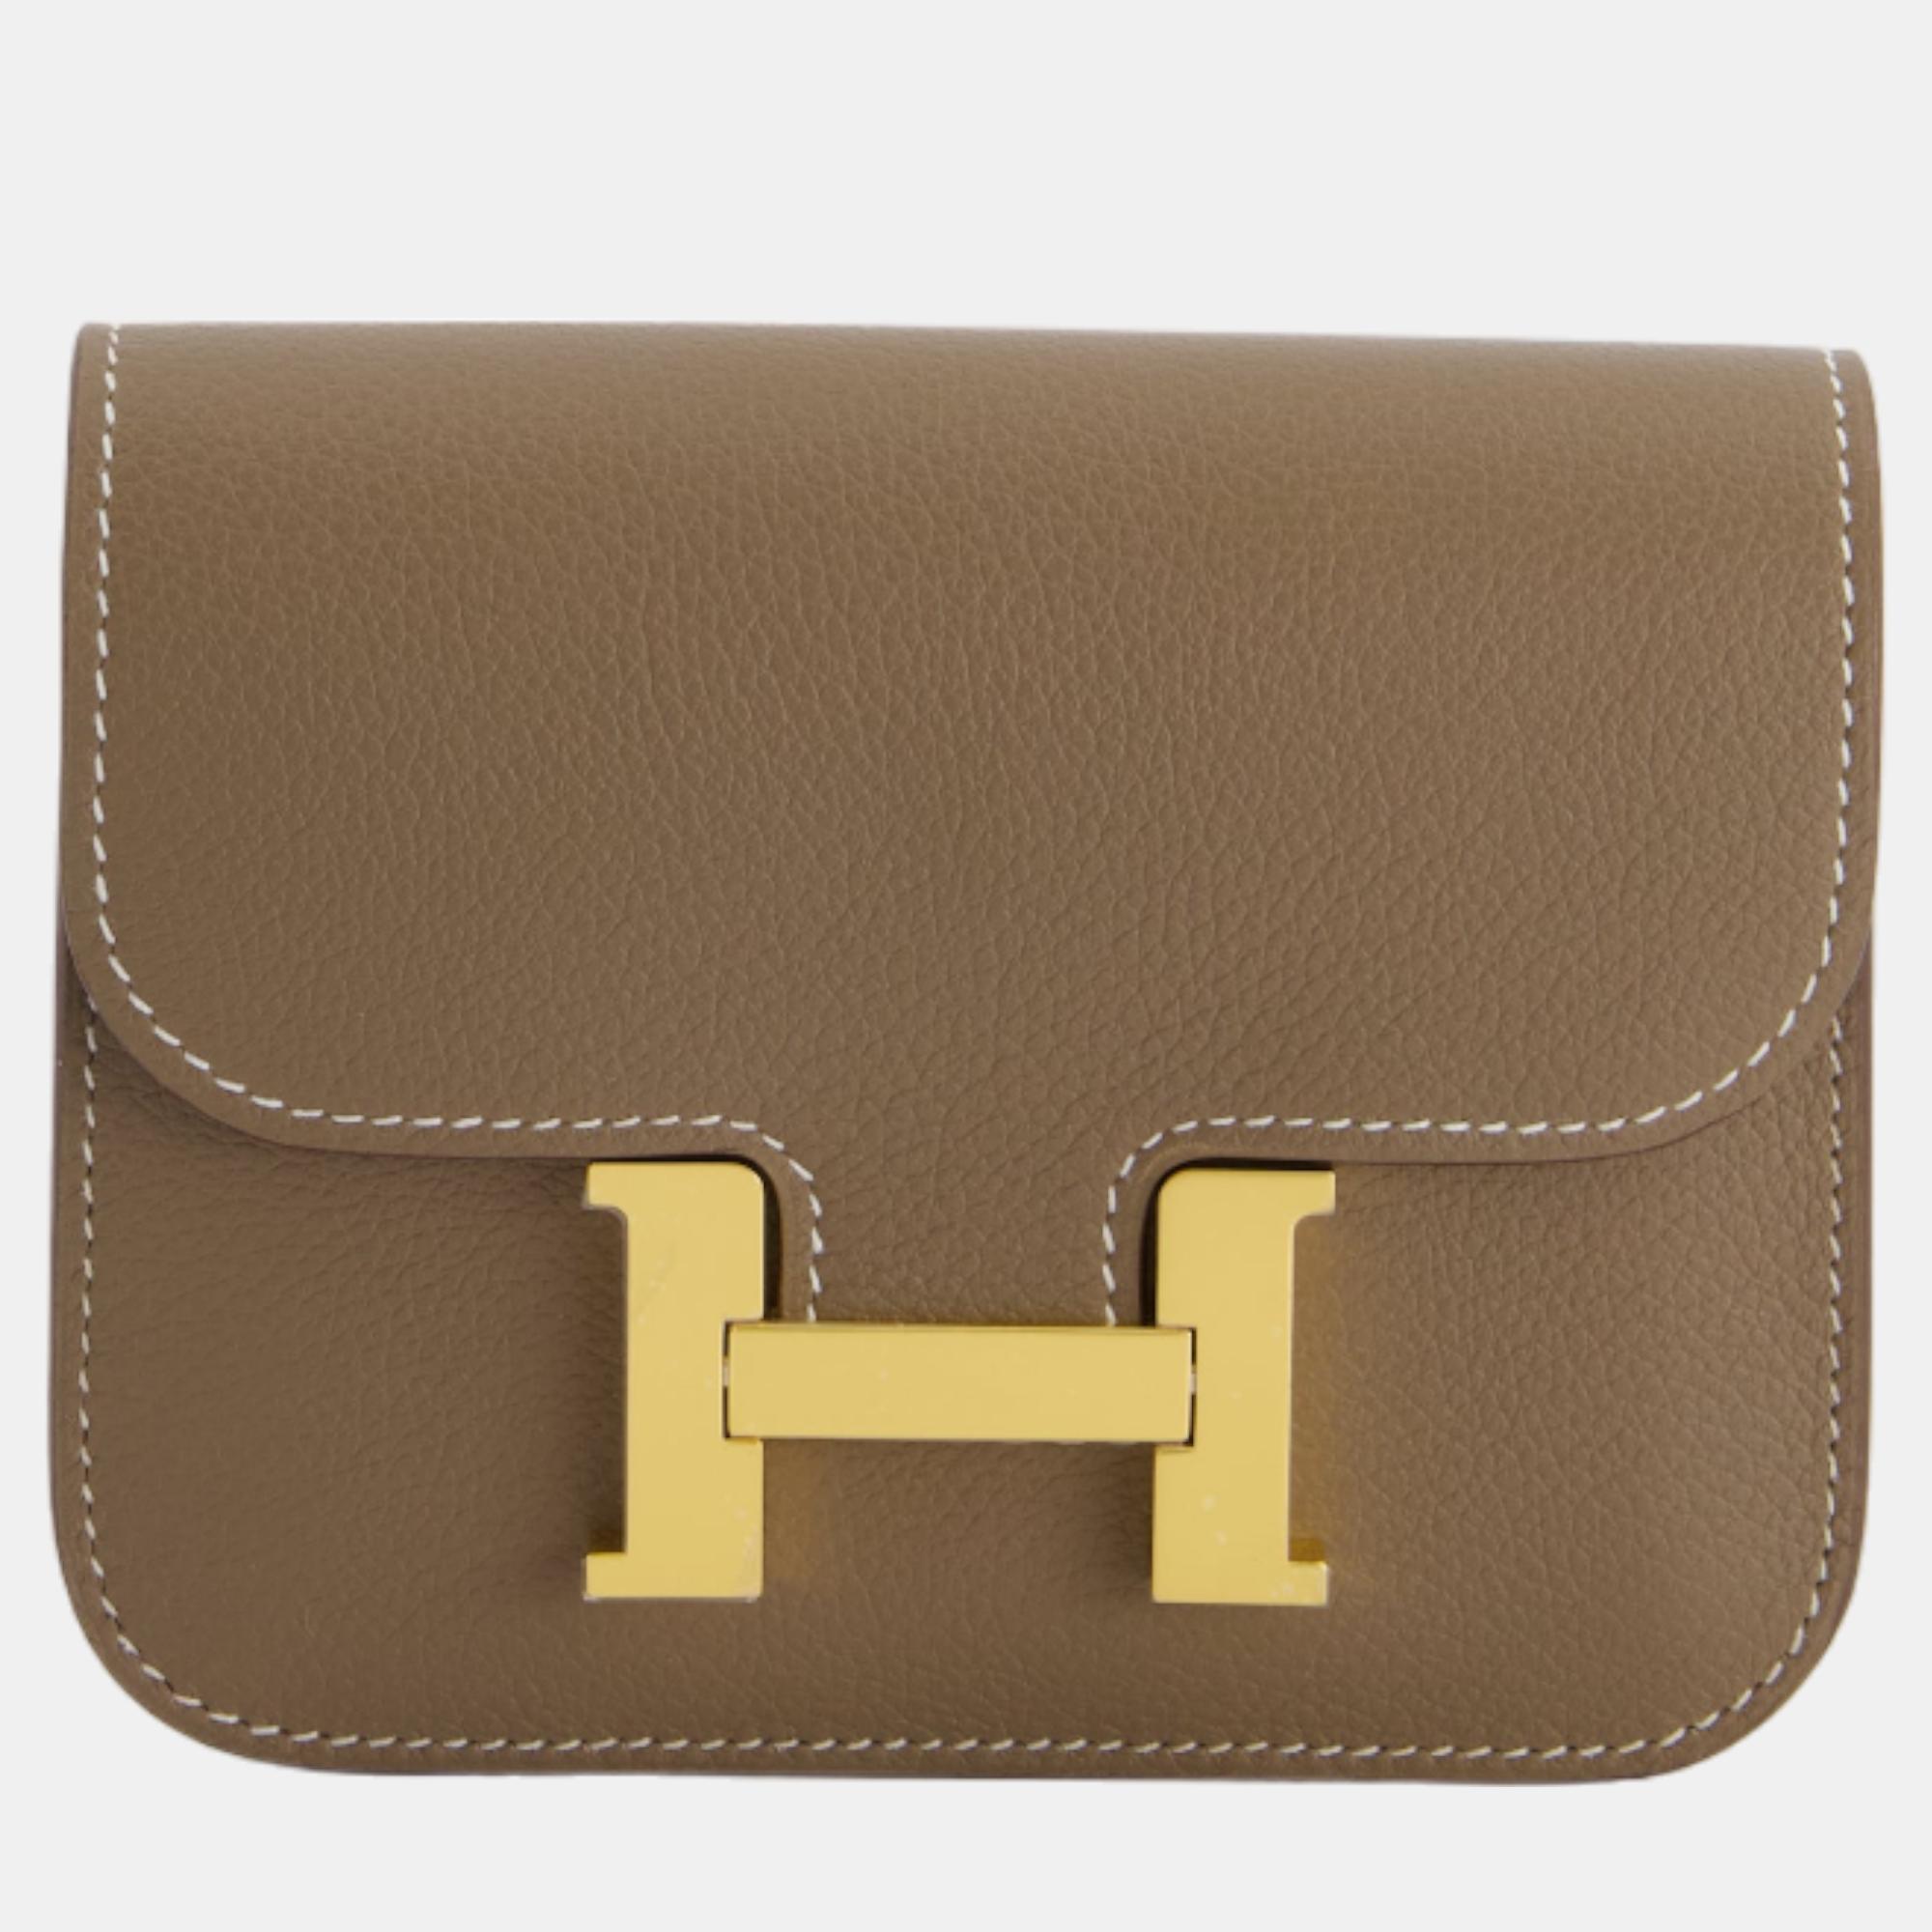 Hermes Constance Slim Belt Bag In Etoupe Evercolor Leather With Gold Hardware